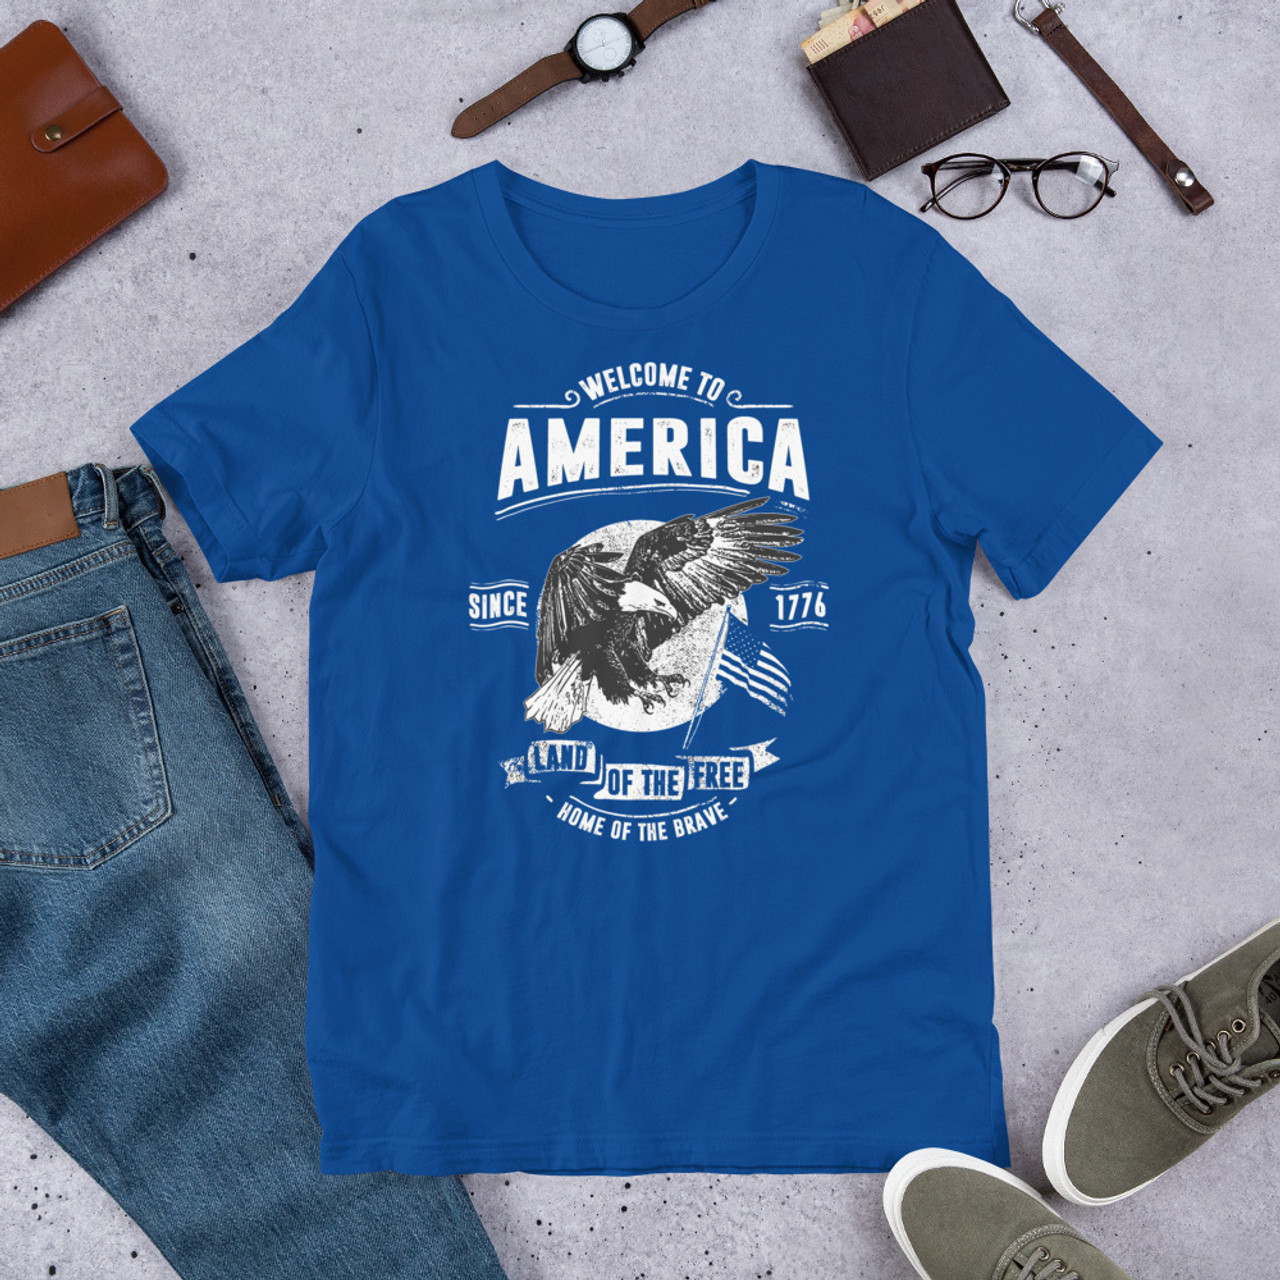 True Royal T-Shirt - Bella + Canvas 3001 Welcome to America